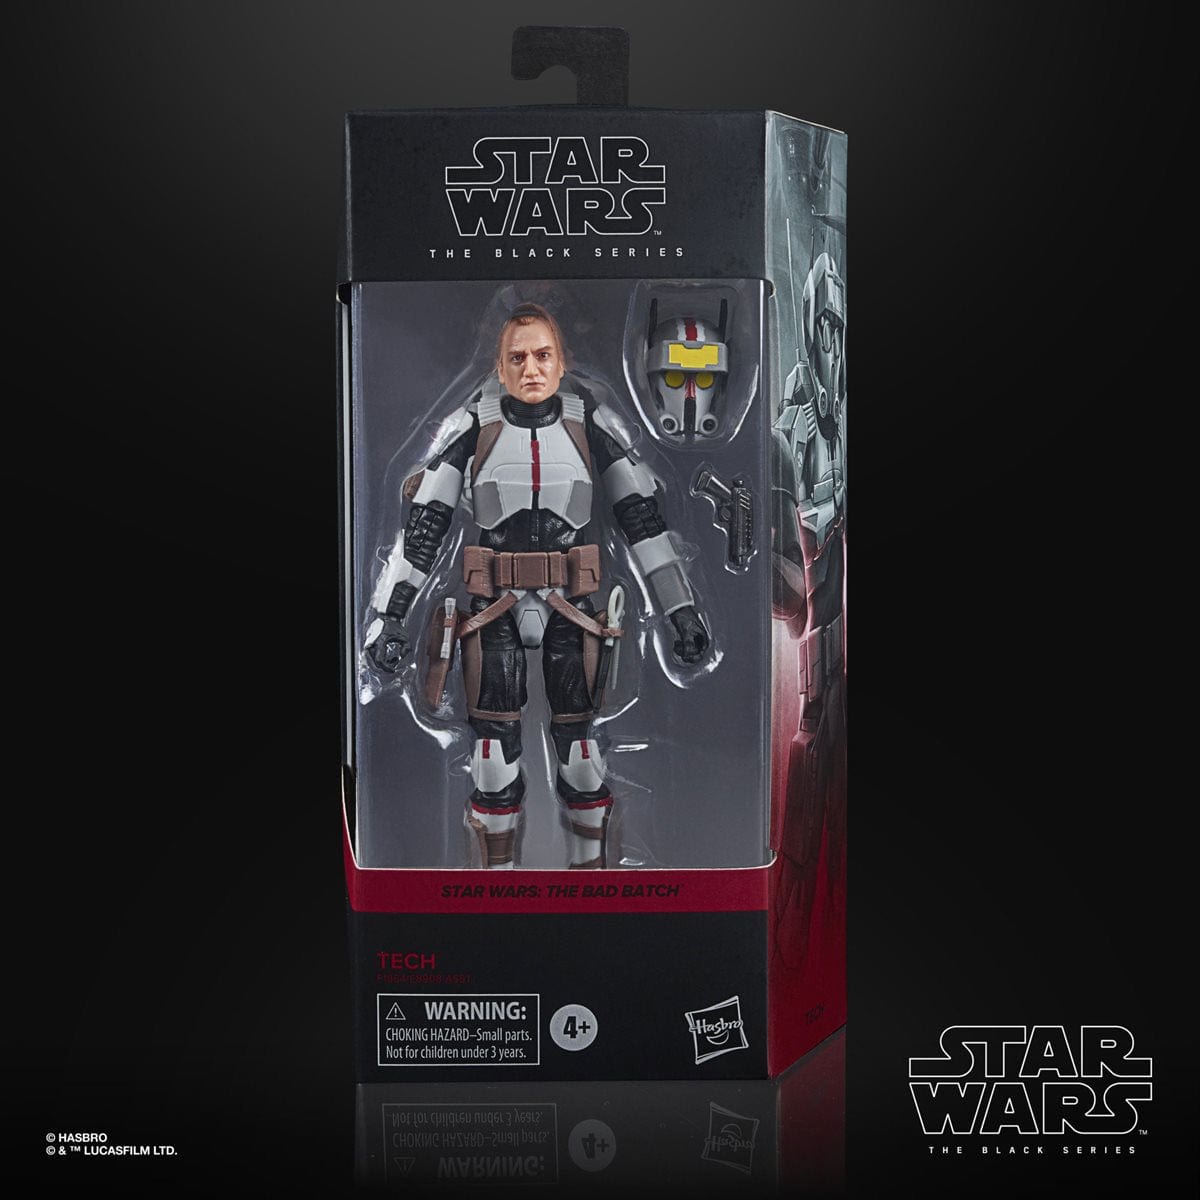 Star Wars The Black Series Tech Toy 6-Inch-Scale Star Wars: The Bad Batch Collectible Figure Media 10 of 10